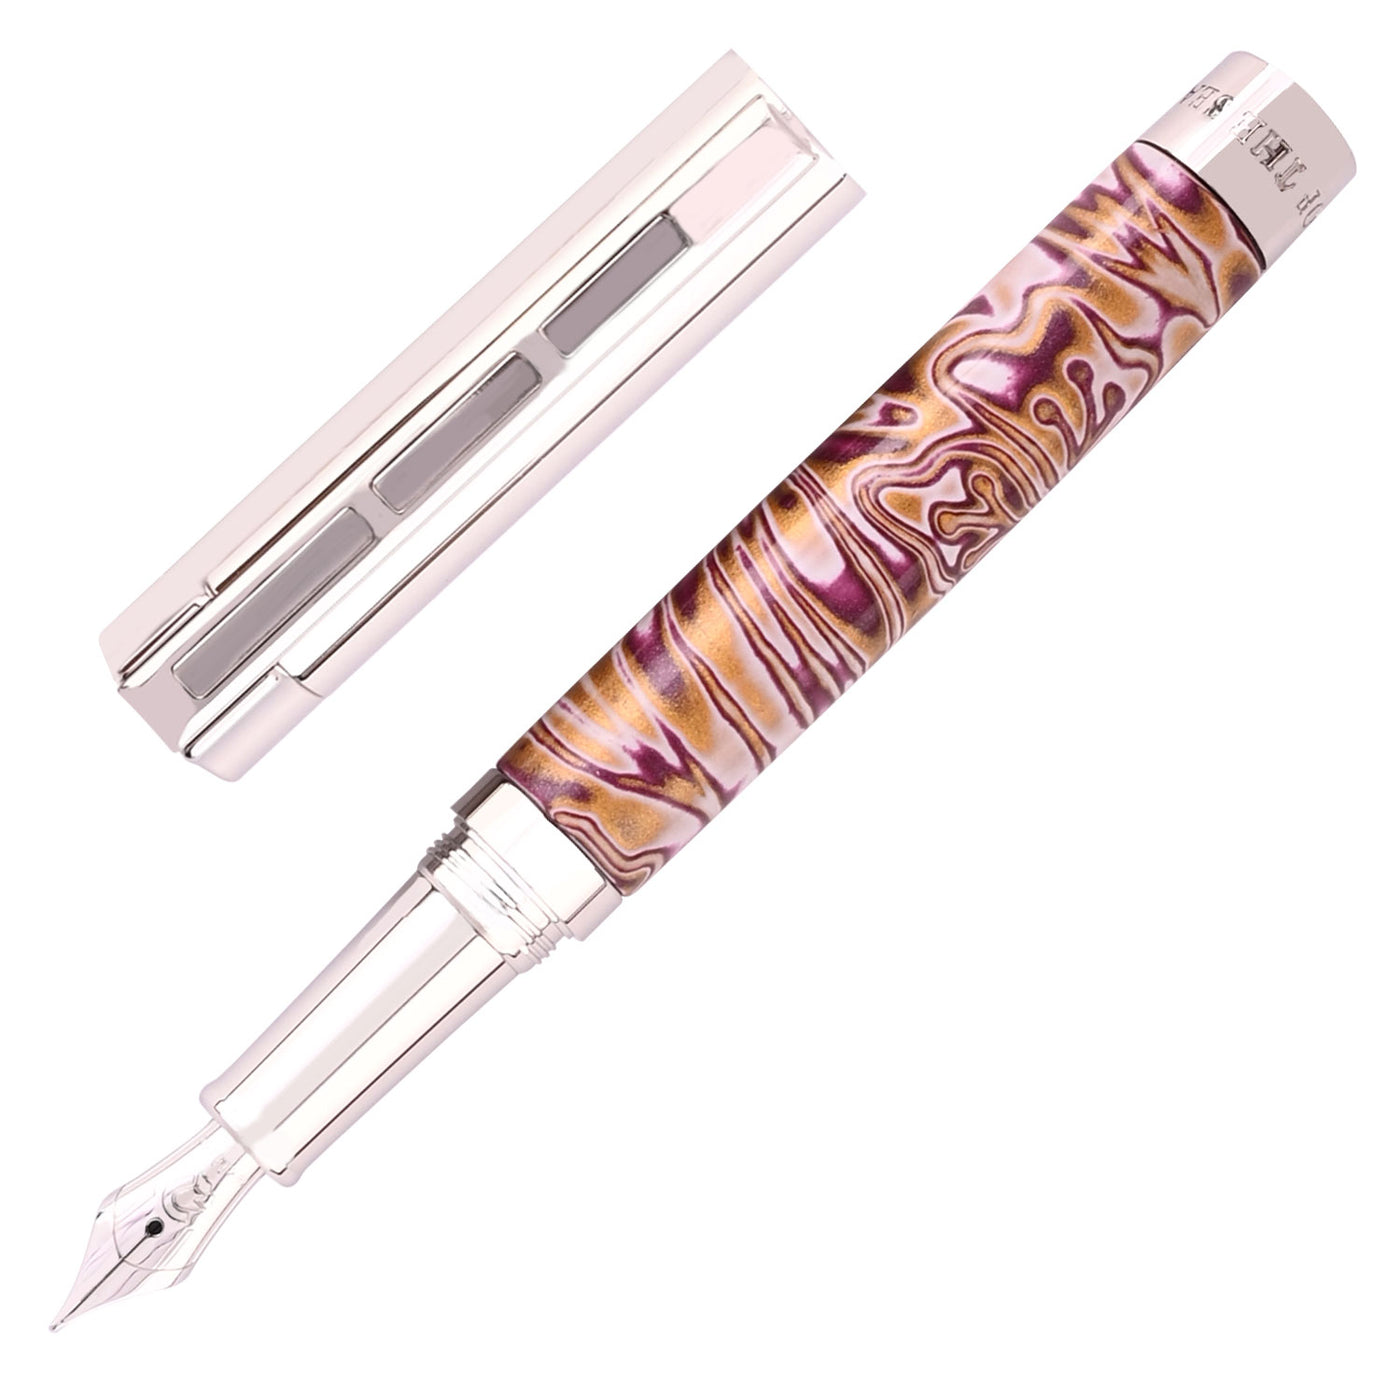 Staedtler Premium Pen of the Season Fountain Pen - Brown CT (Limited Edition) 1